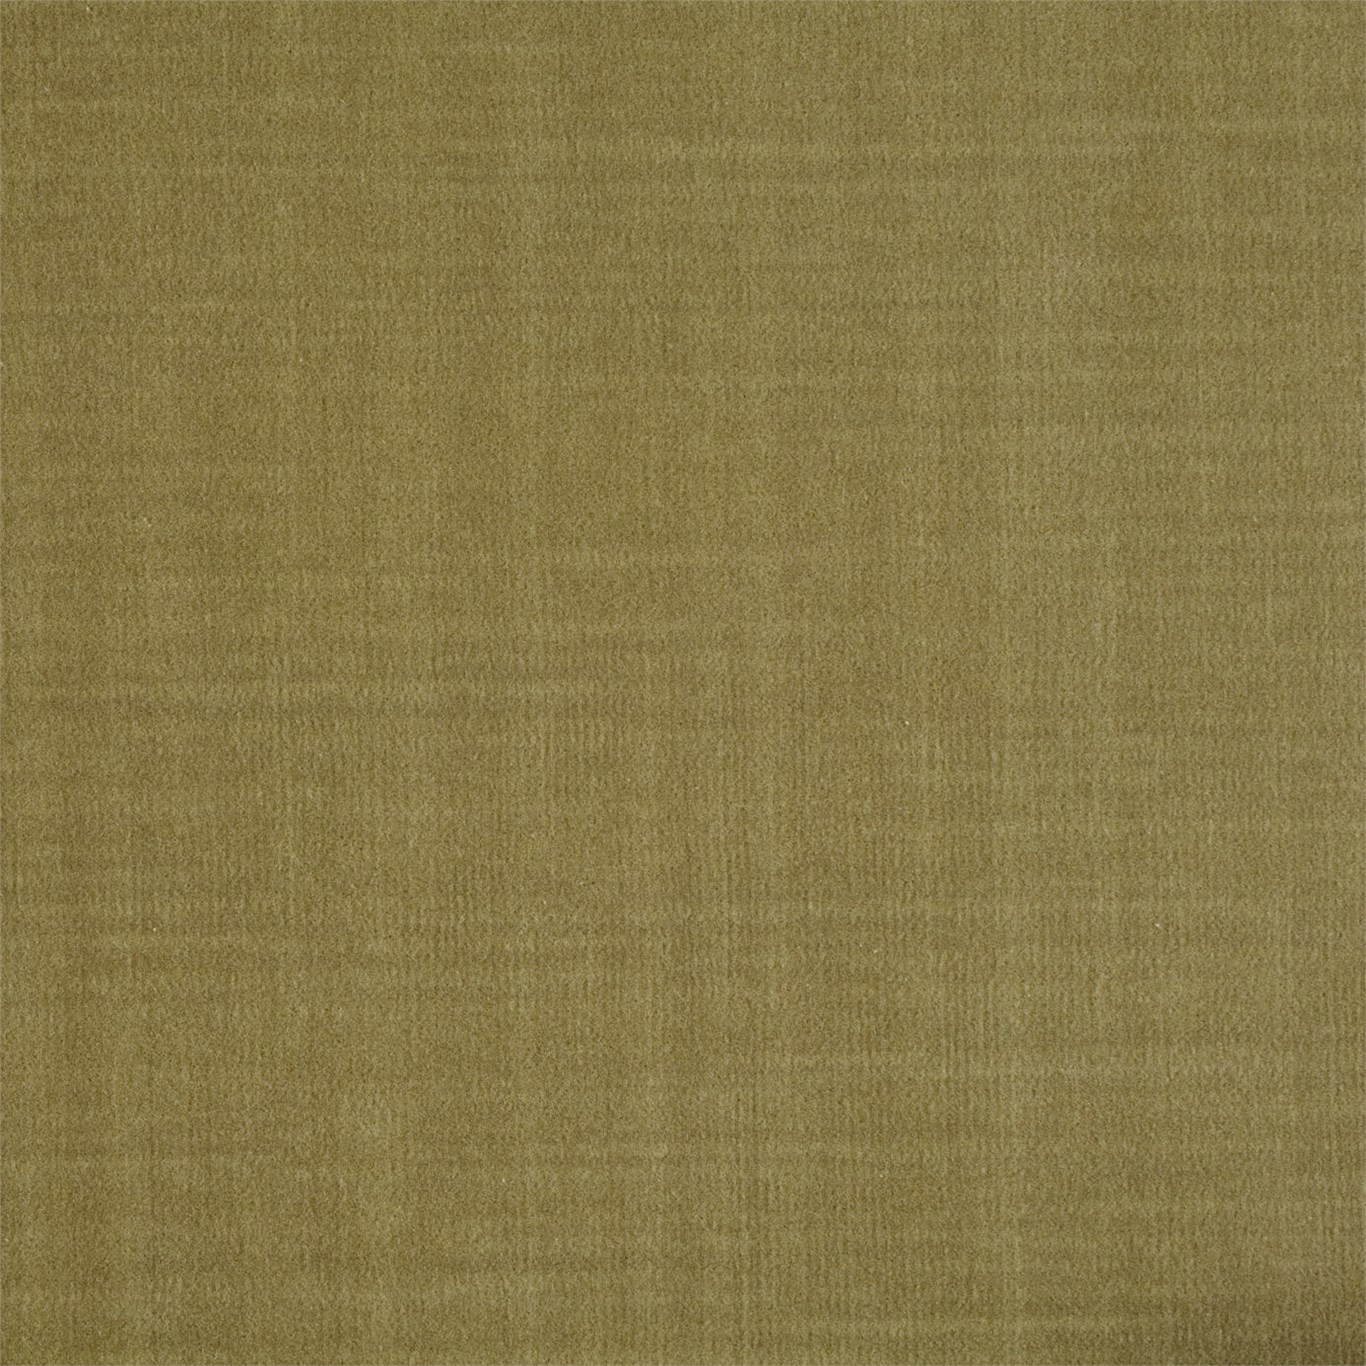 Birodo Old Gold Fabric by ZOF